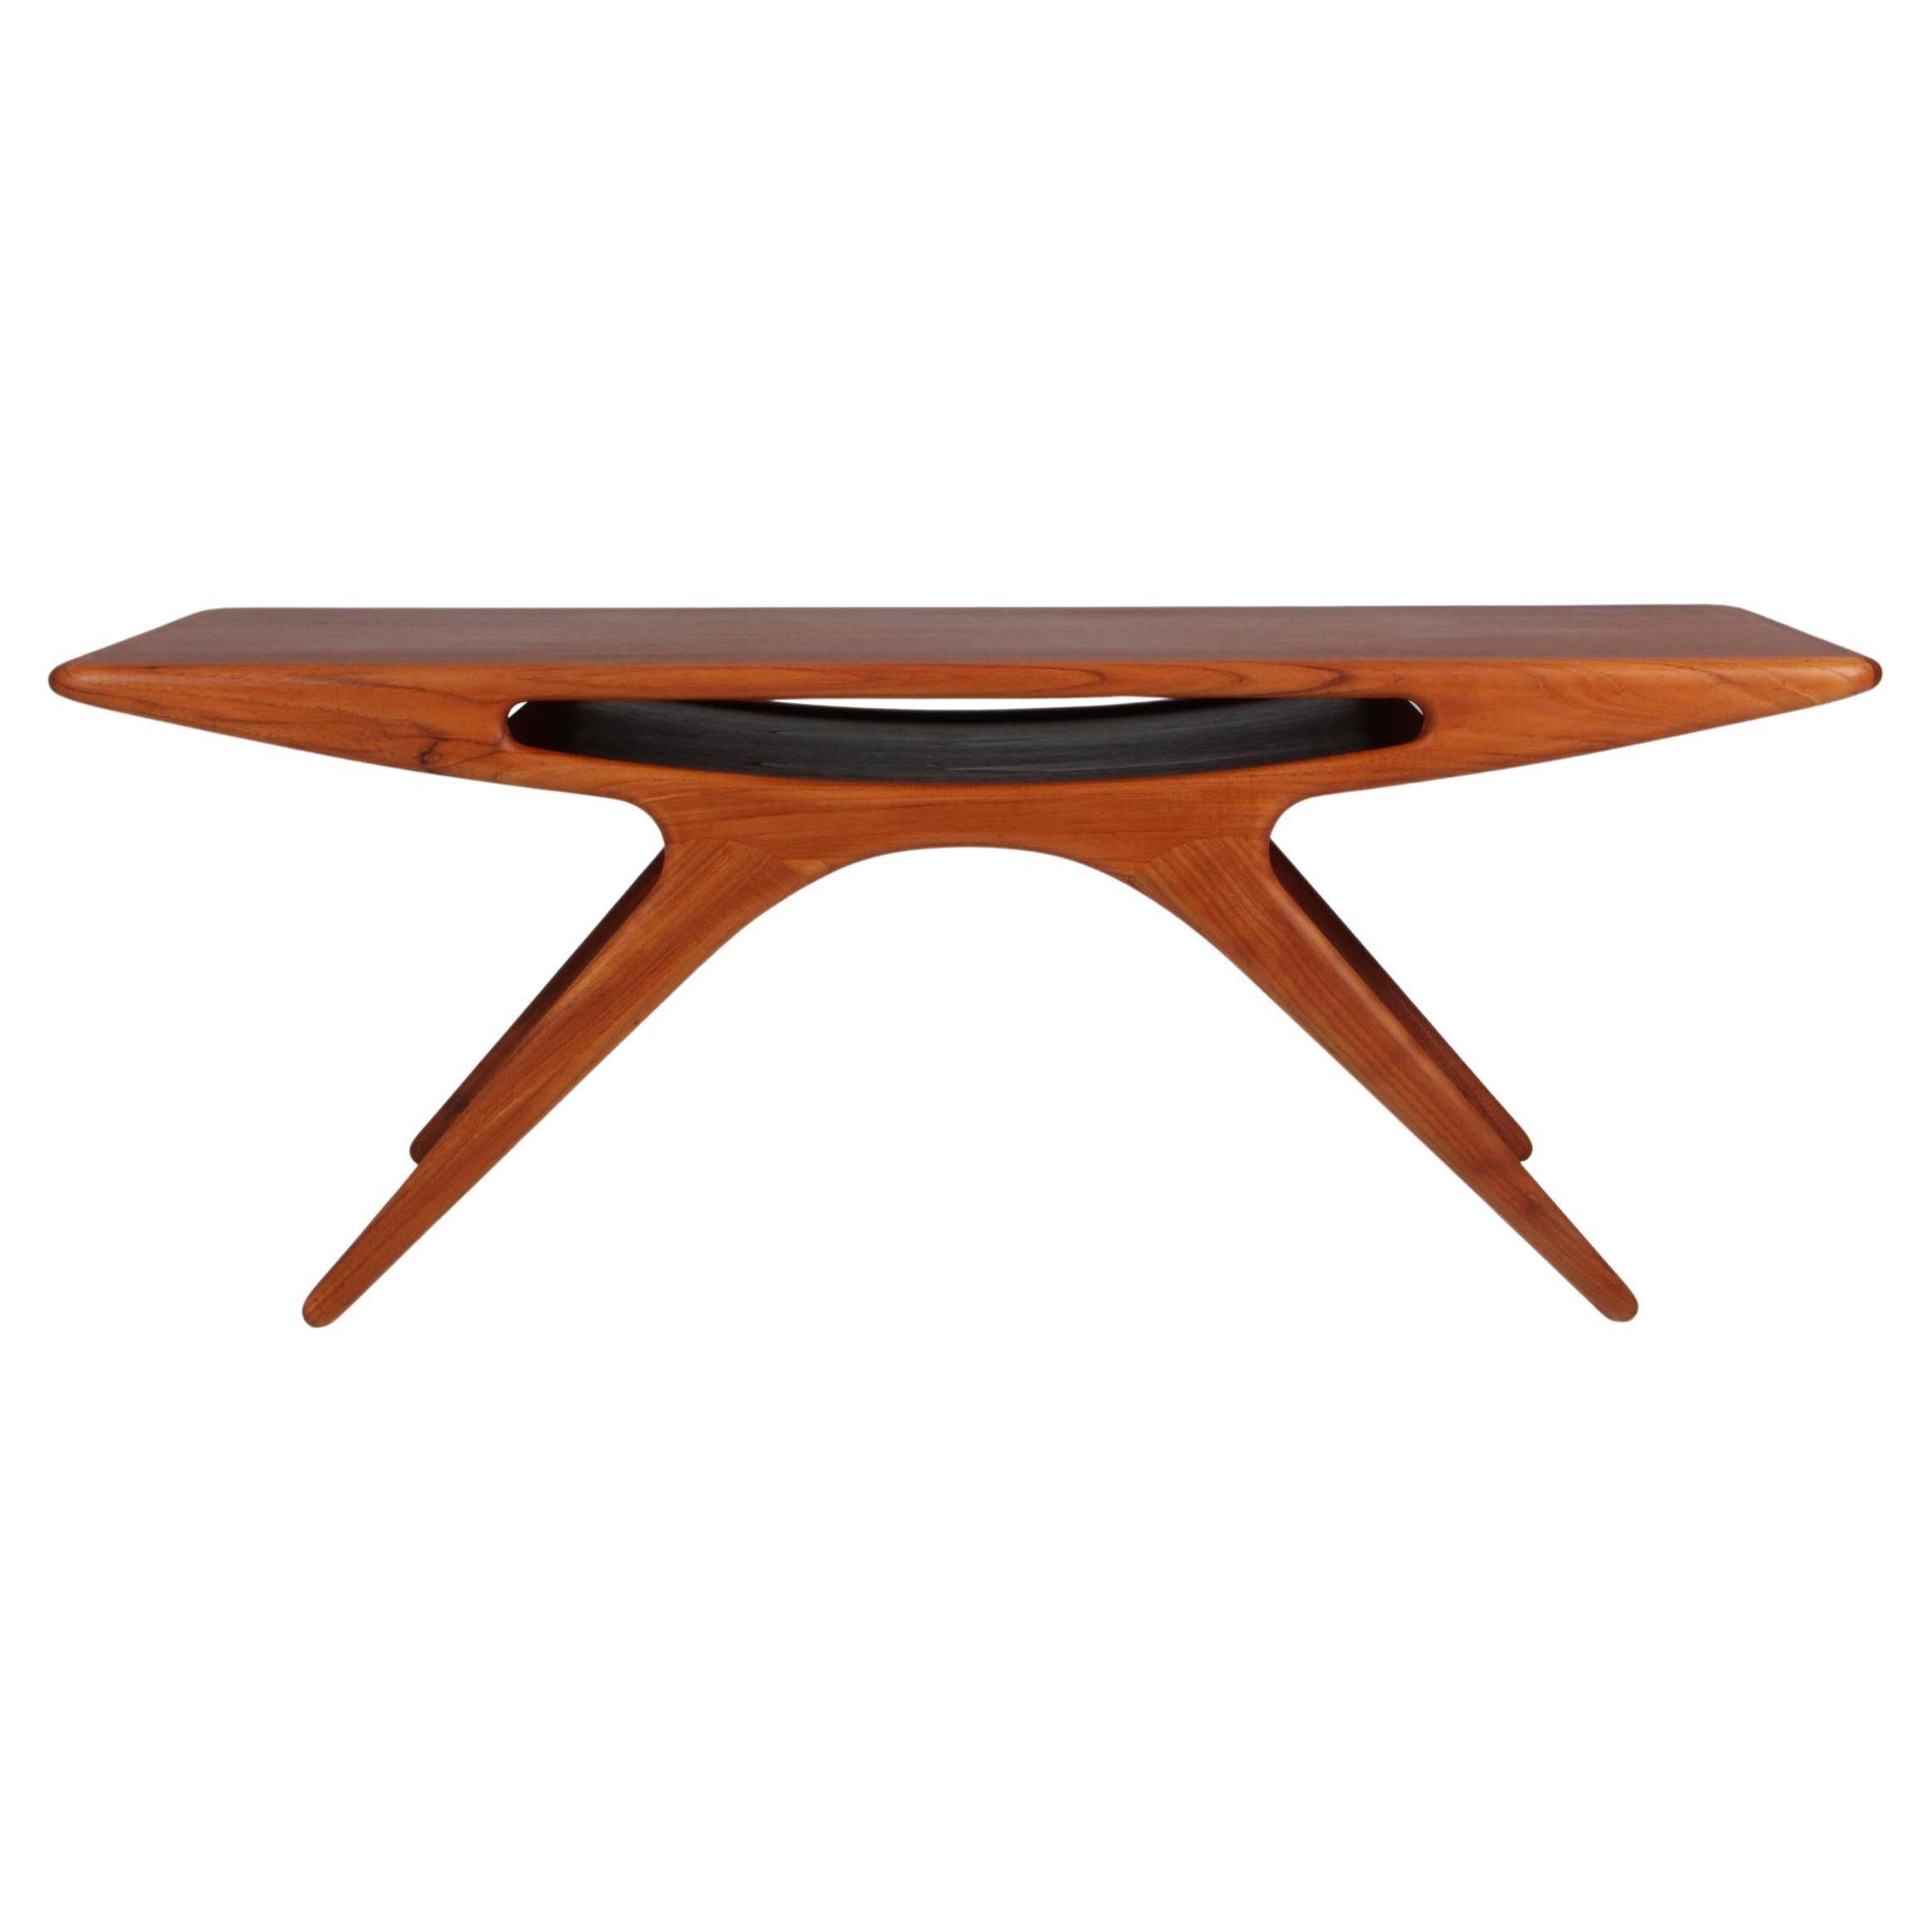 Johannes Andersen Coffee Table Produced by CFC Silkeborg in Denmark